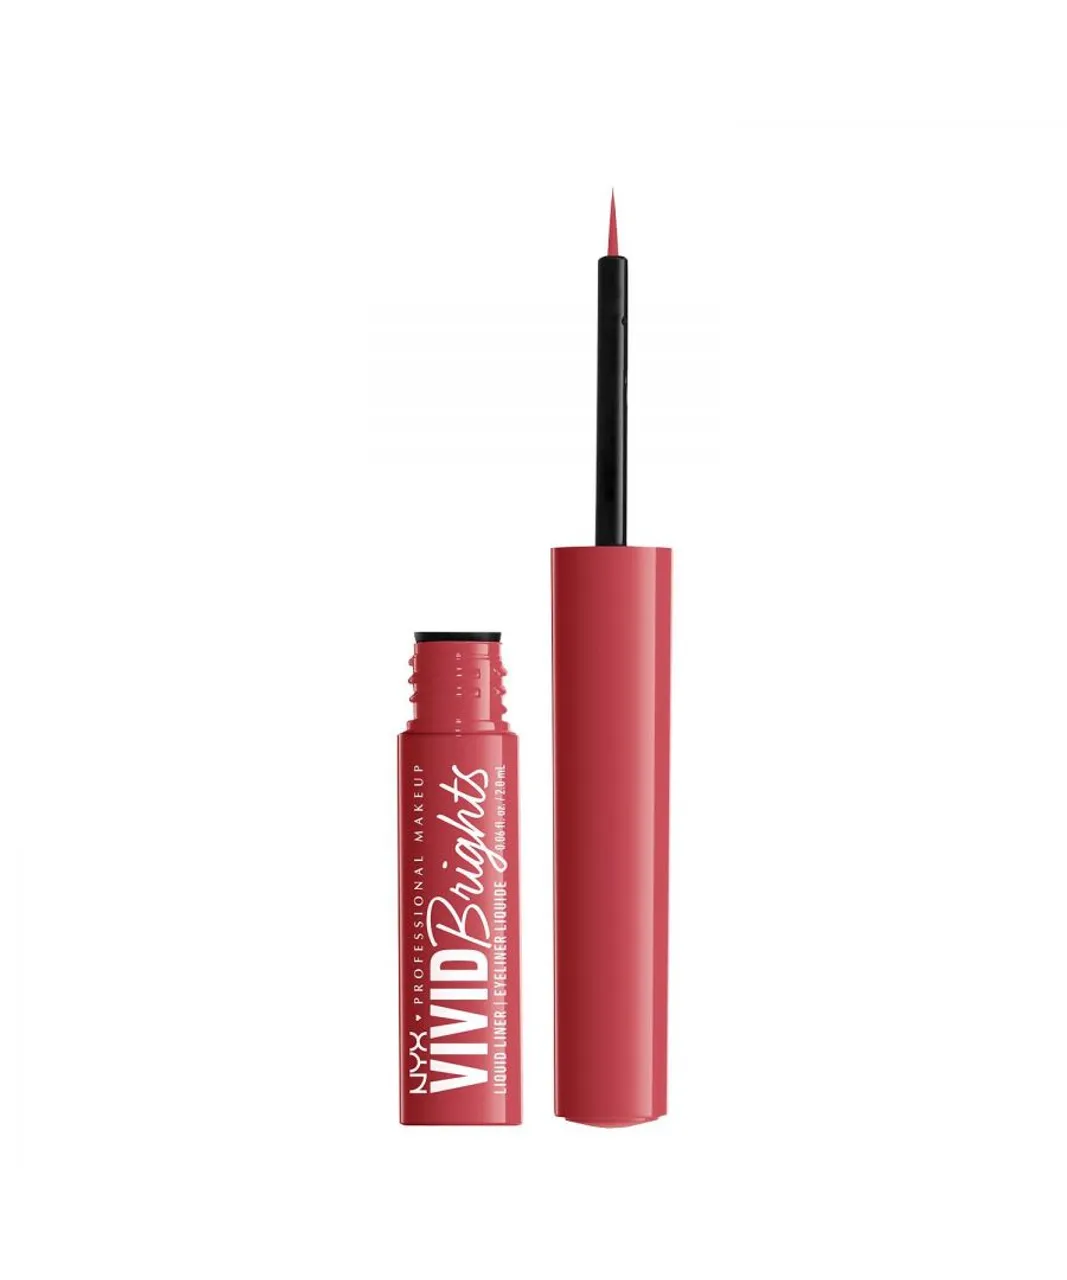 NYX Womens Professional Makeup Vivid Brights Eyeliner with Easy Glide Formula, On Red - One Size